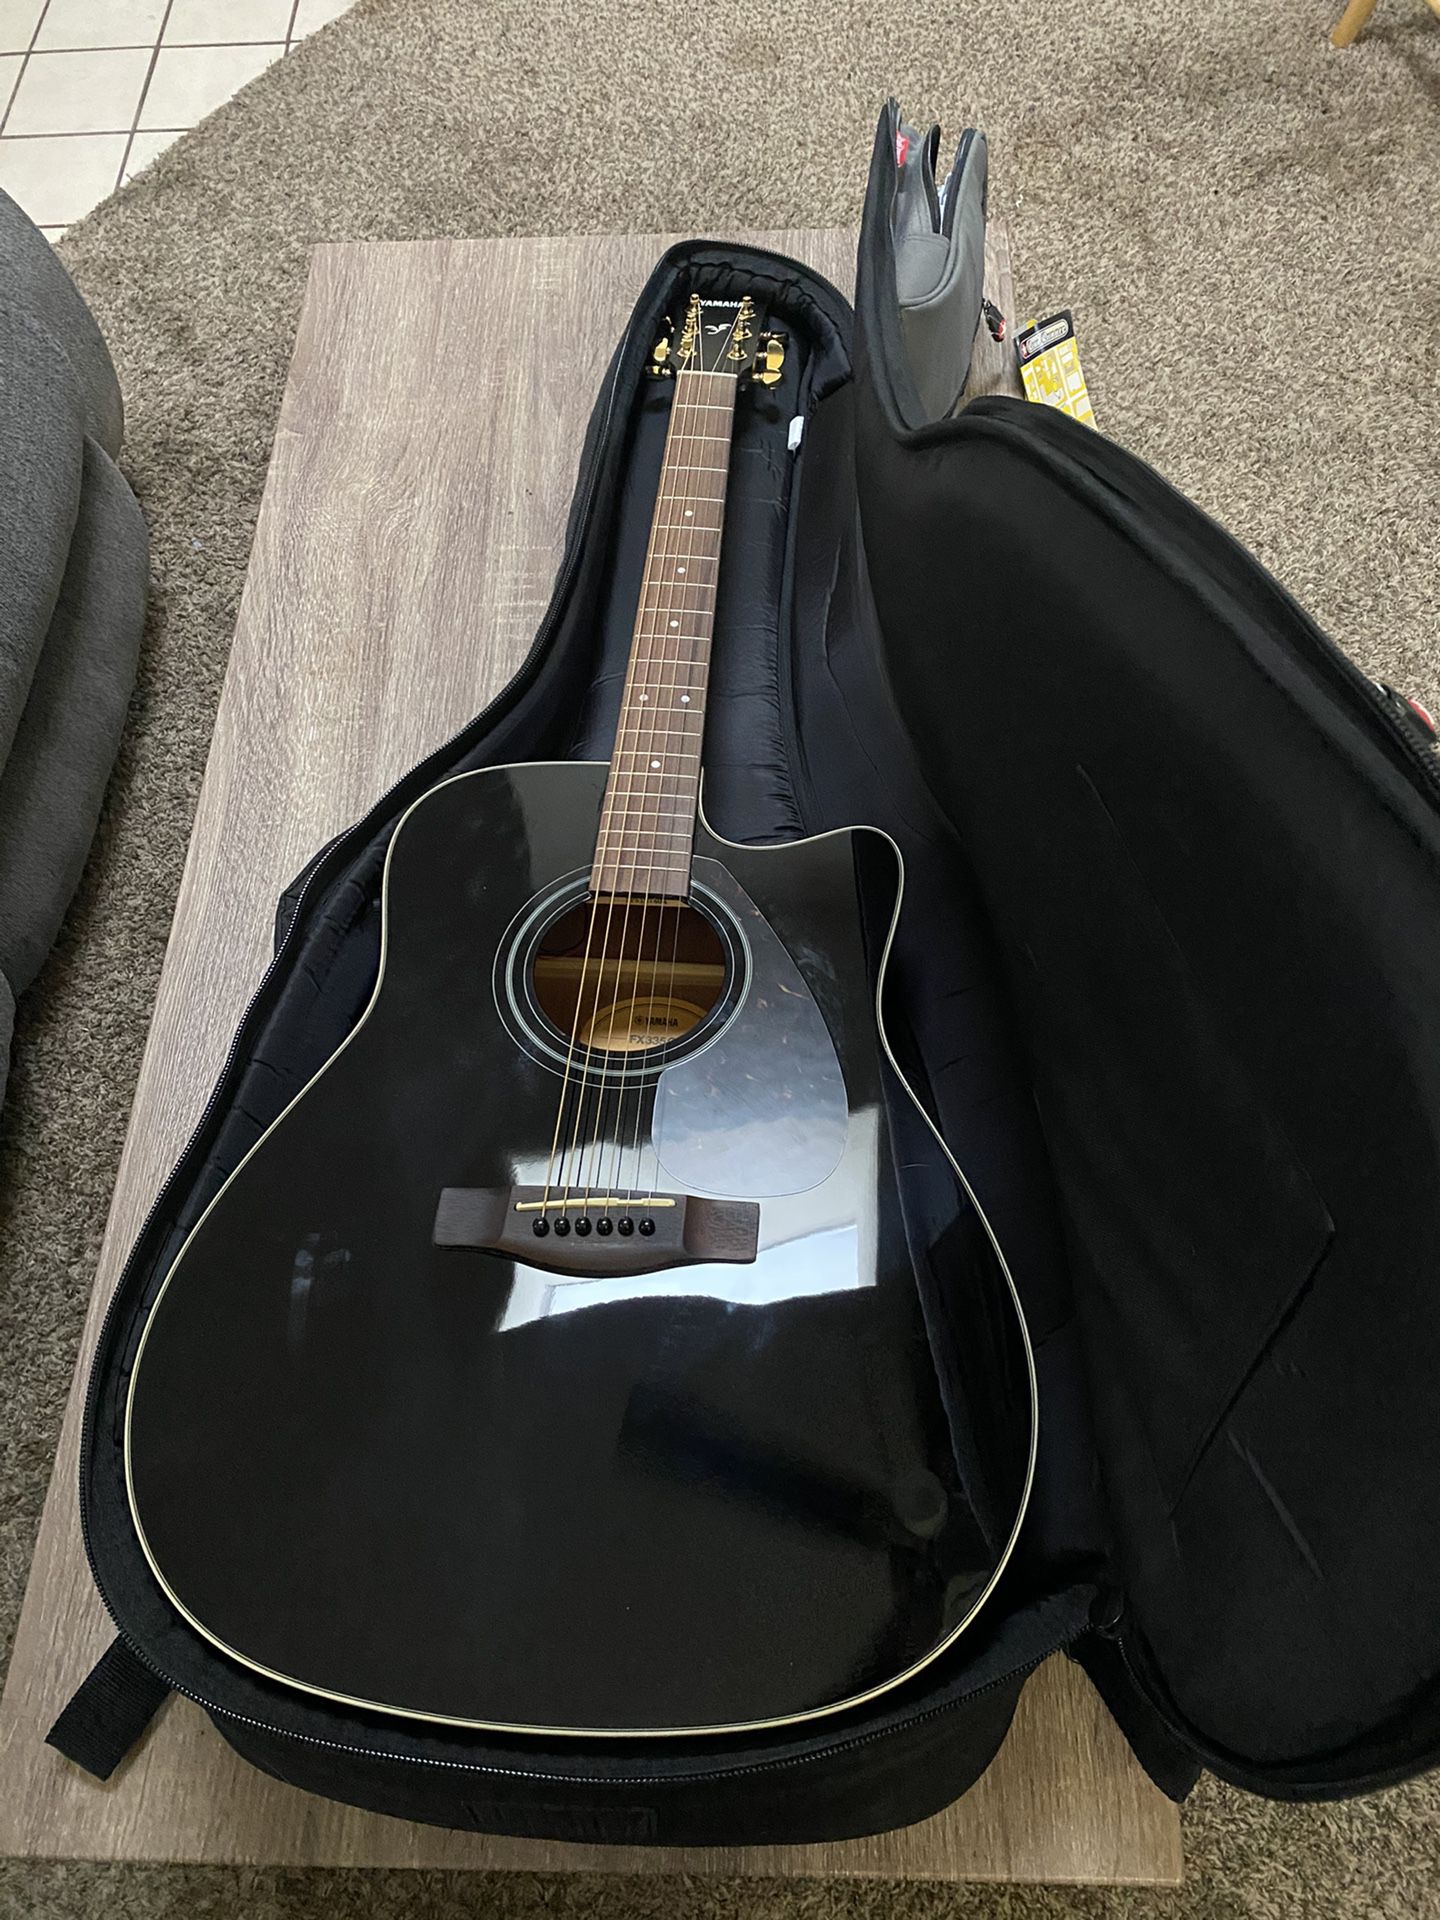 **never used** Yamaha FX335C Dreadnought Acoustic-Electric Guitar Black + case + 3 year warranty